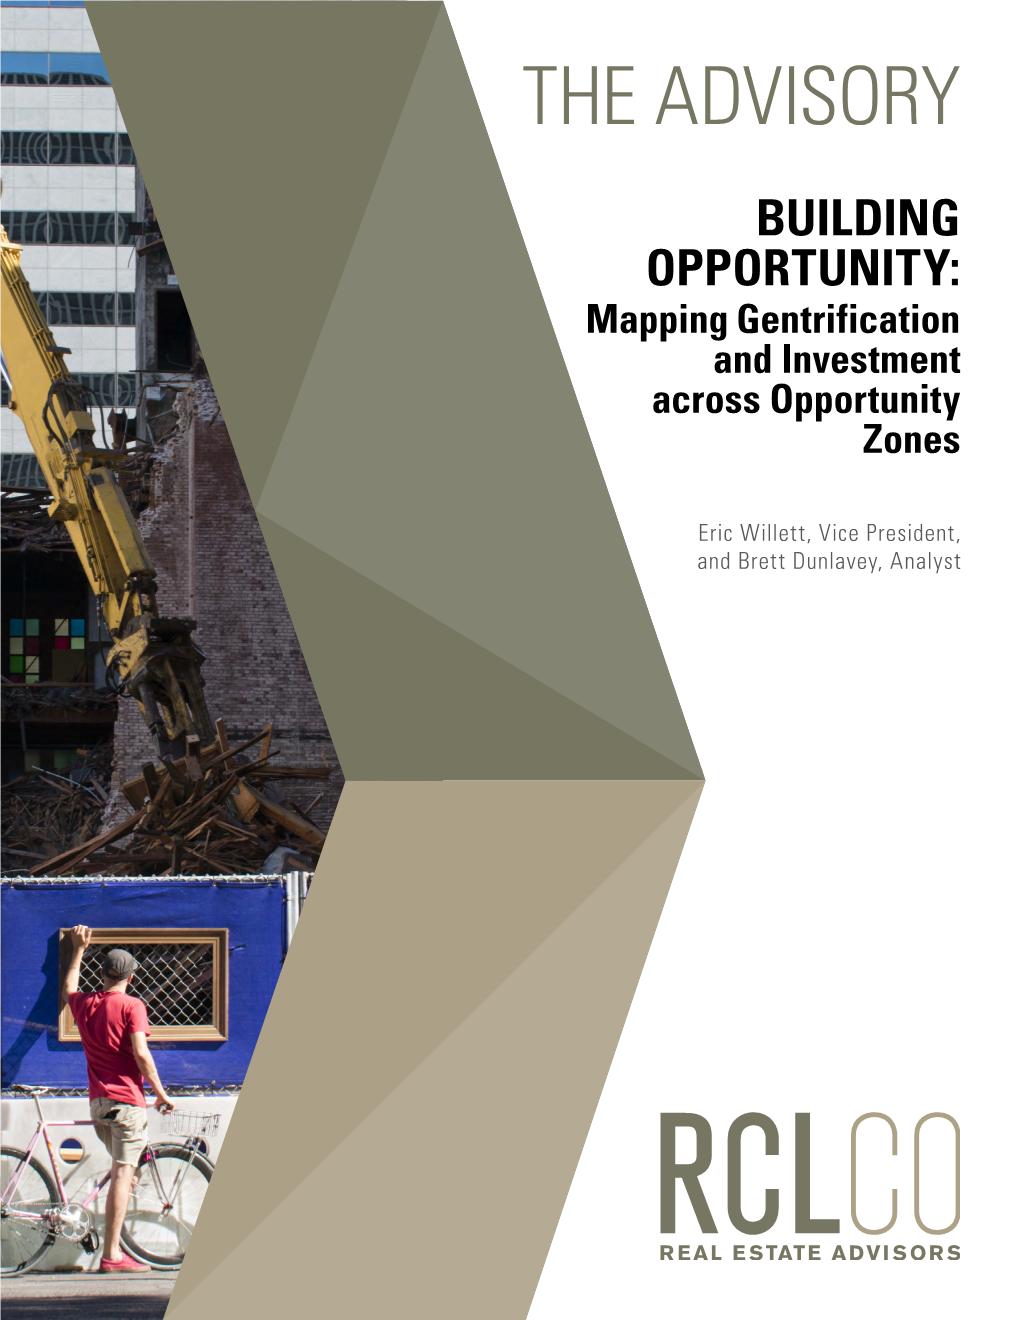 Mapping Gentrification and Investment Across Opportunity Zones